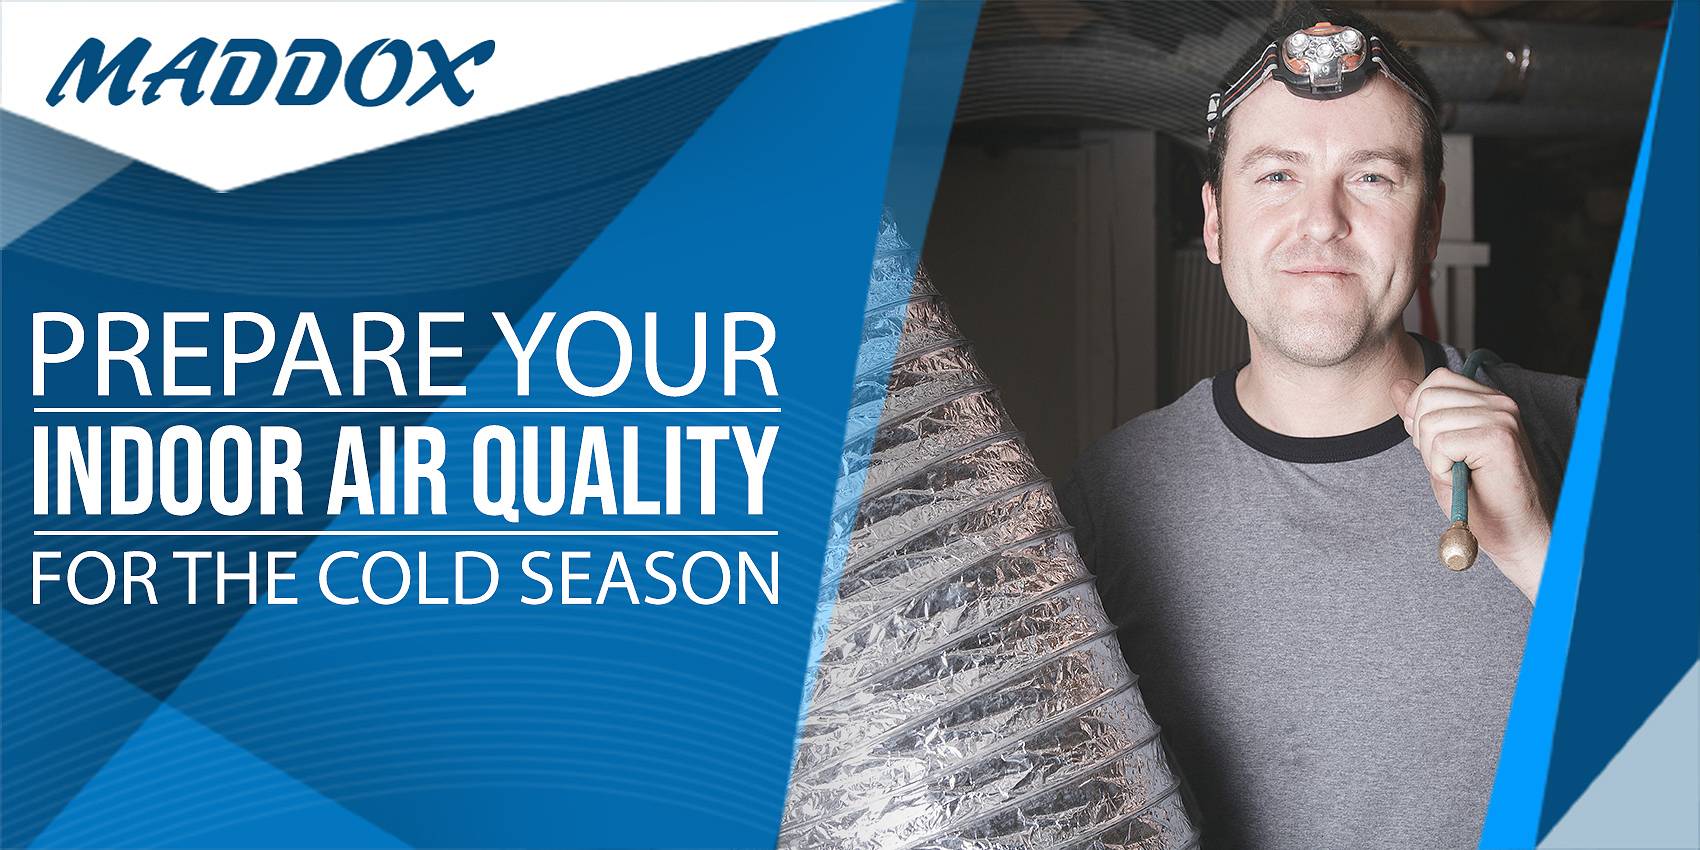 Prepare Your Indoor Air Quality for the Cold Season